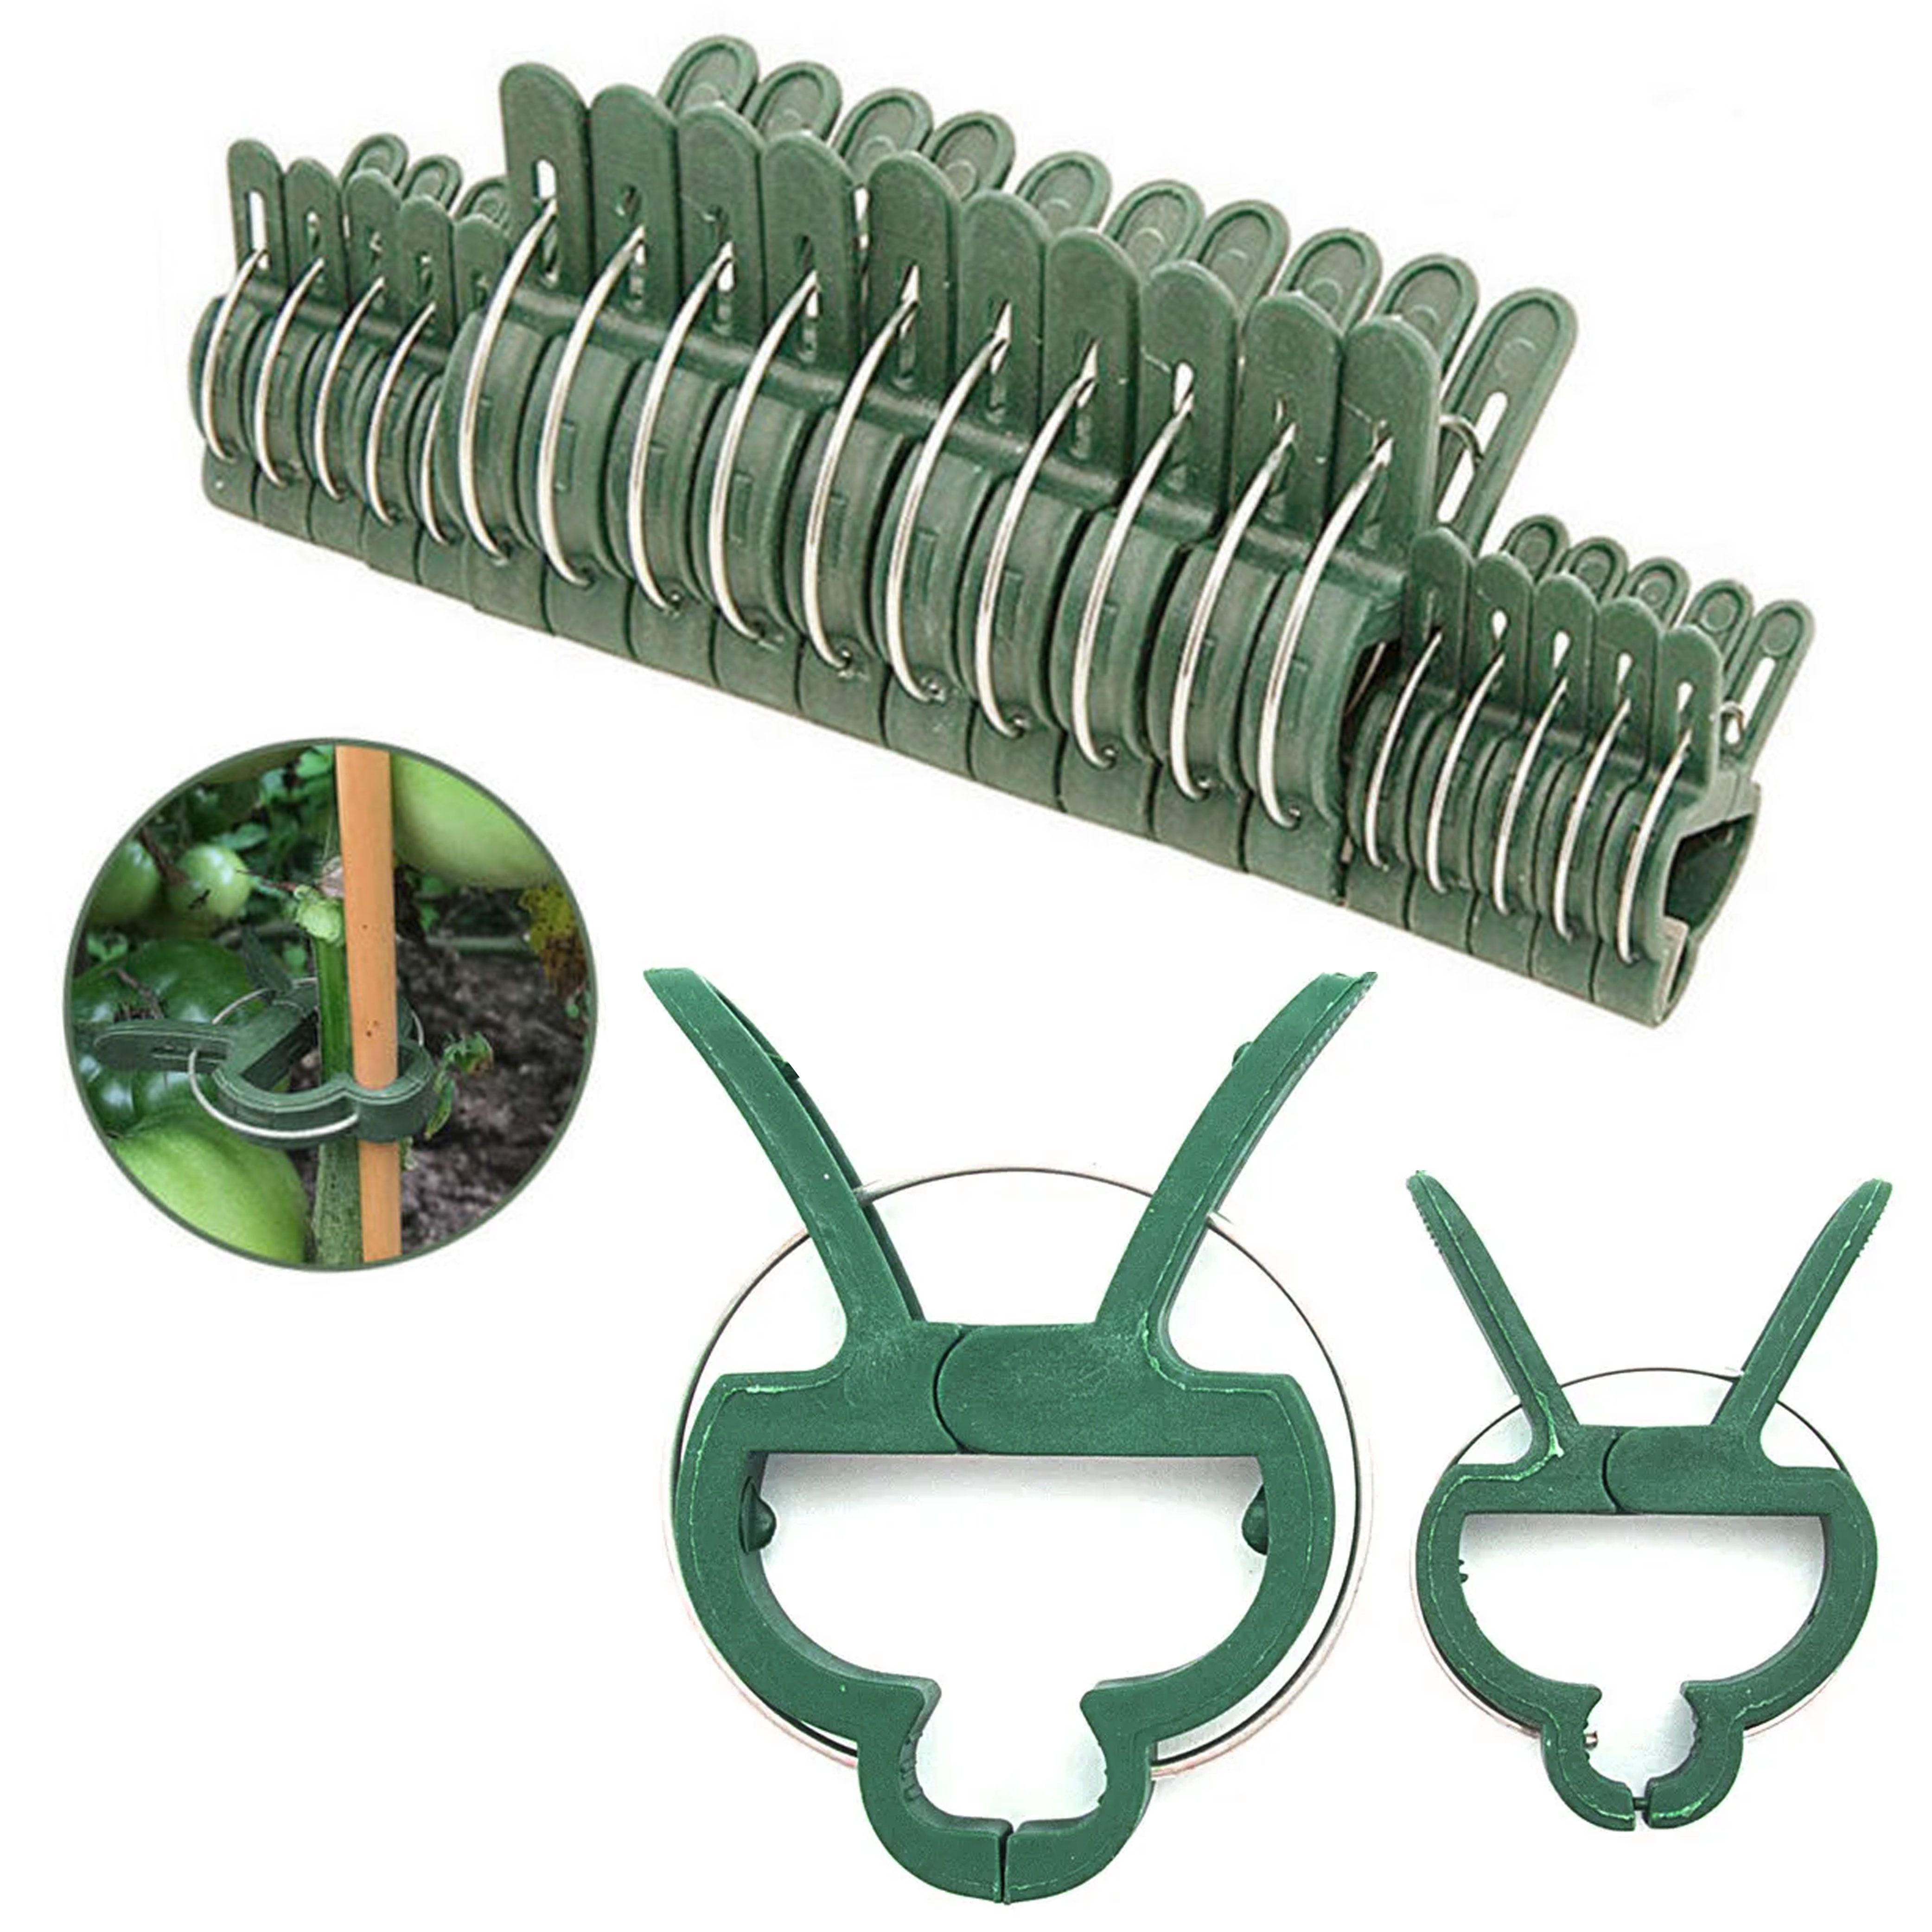 20Pcs Plastic Garden Cane Support Plant Clips Sprung Spring Shrub Ties Practical 